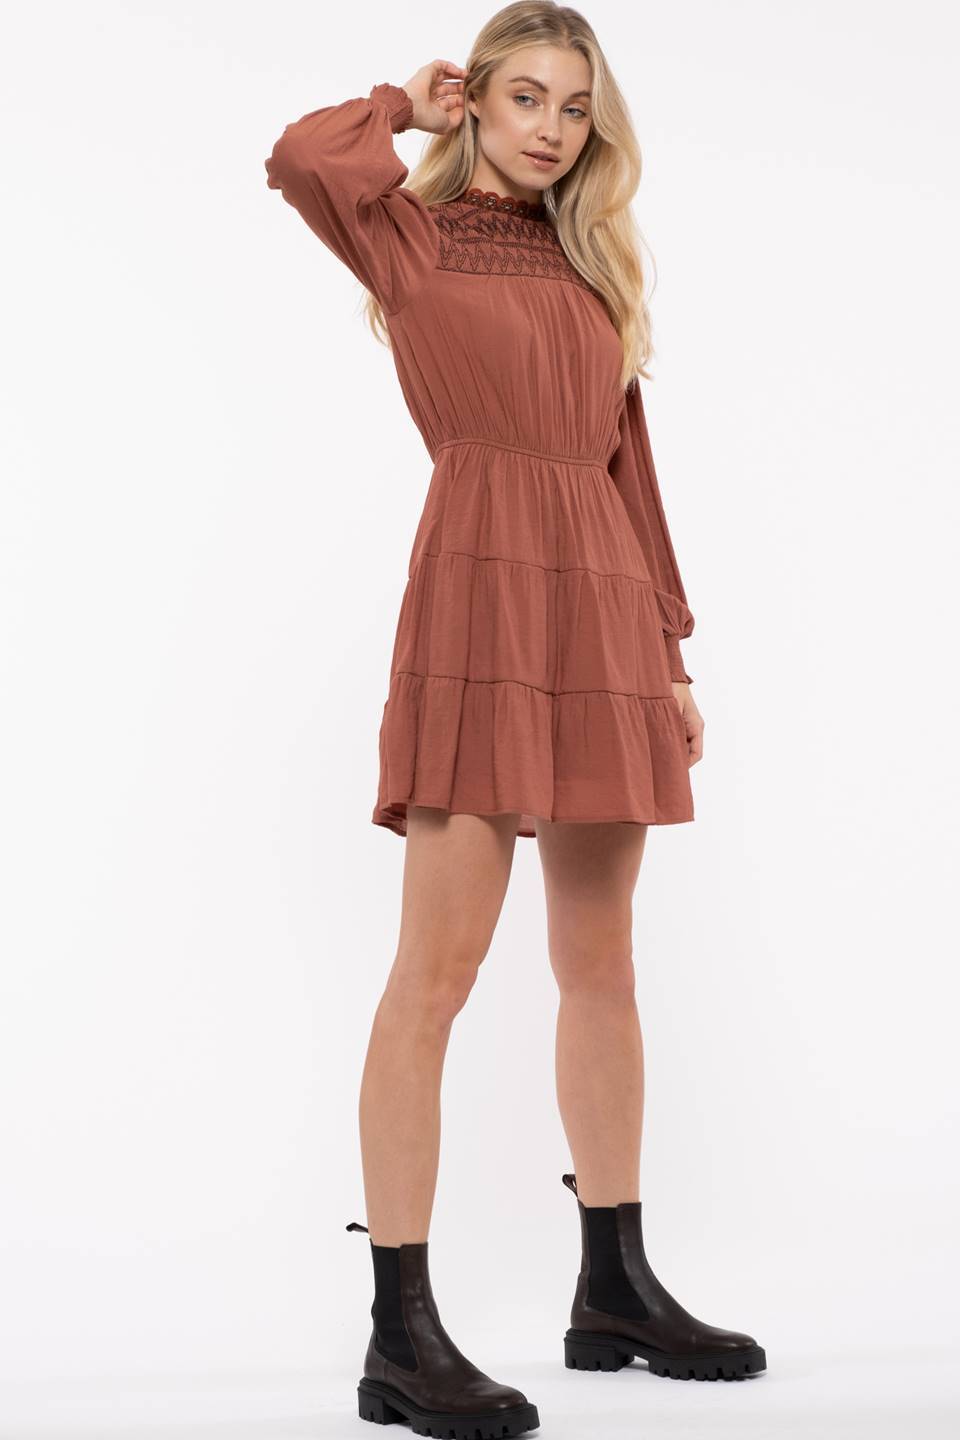 These Are The Days Dress - Sienna